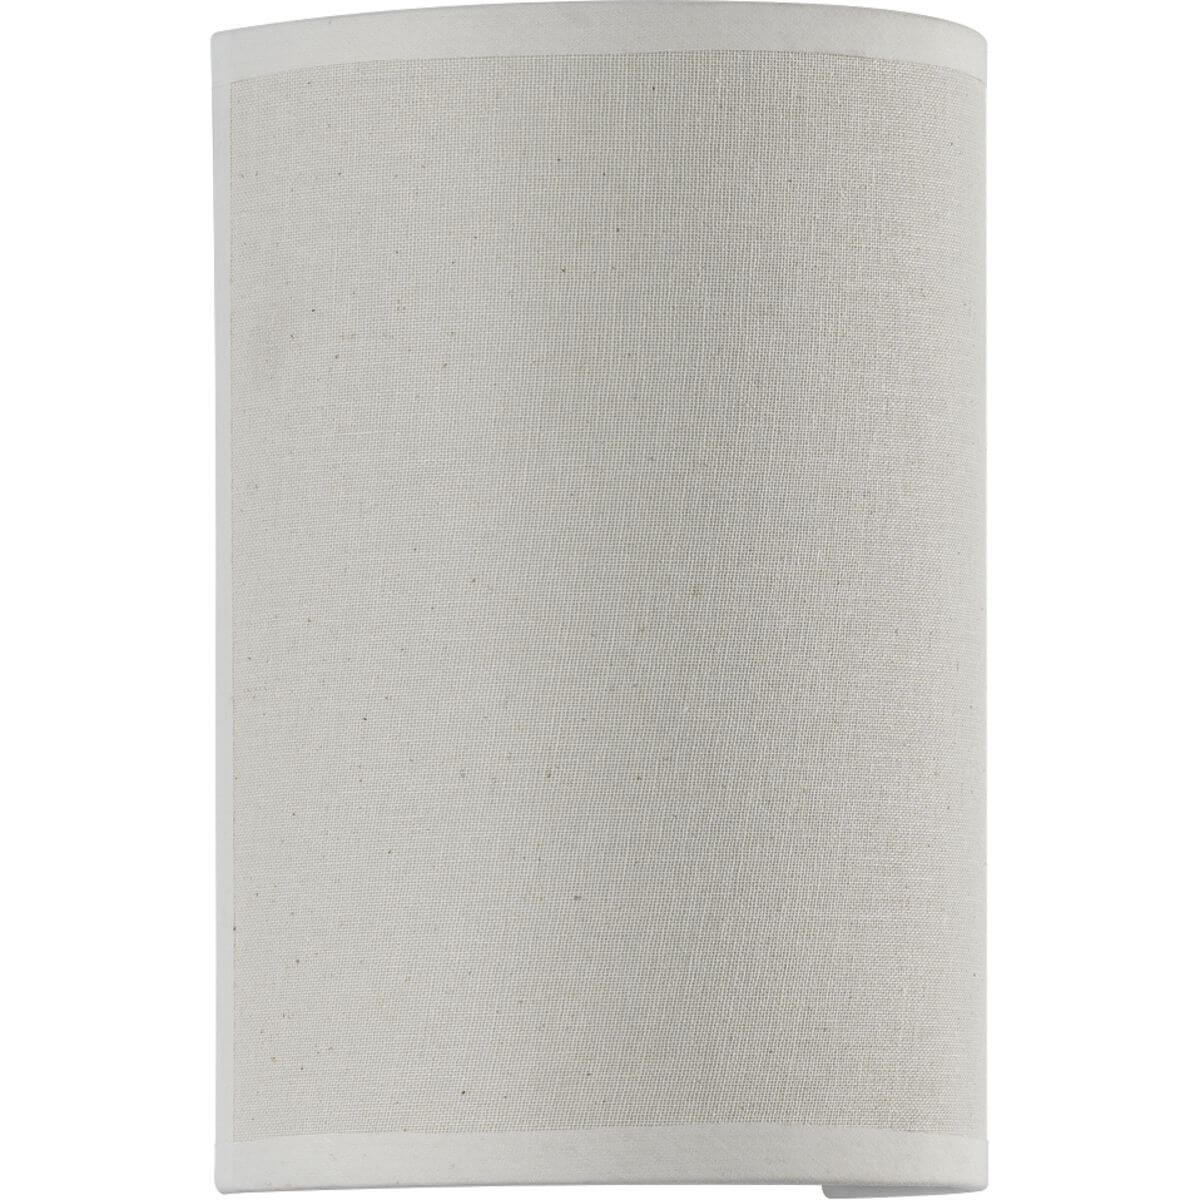 Progress Lighting Inspire 1 Light 9 inch Tall LED Wall Sconce with Off White Linen Shade P710071-159-30